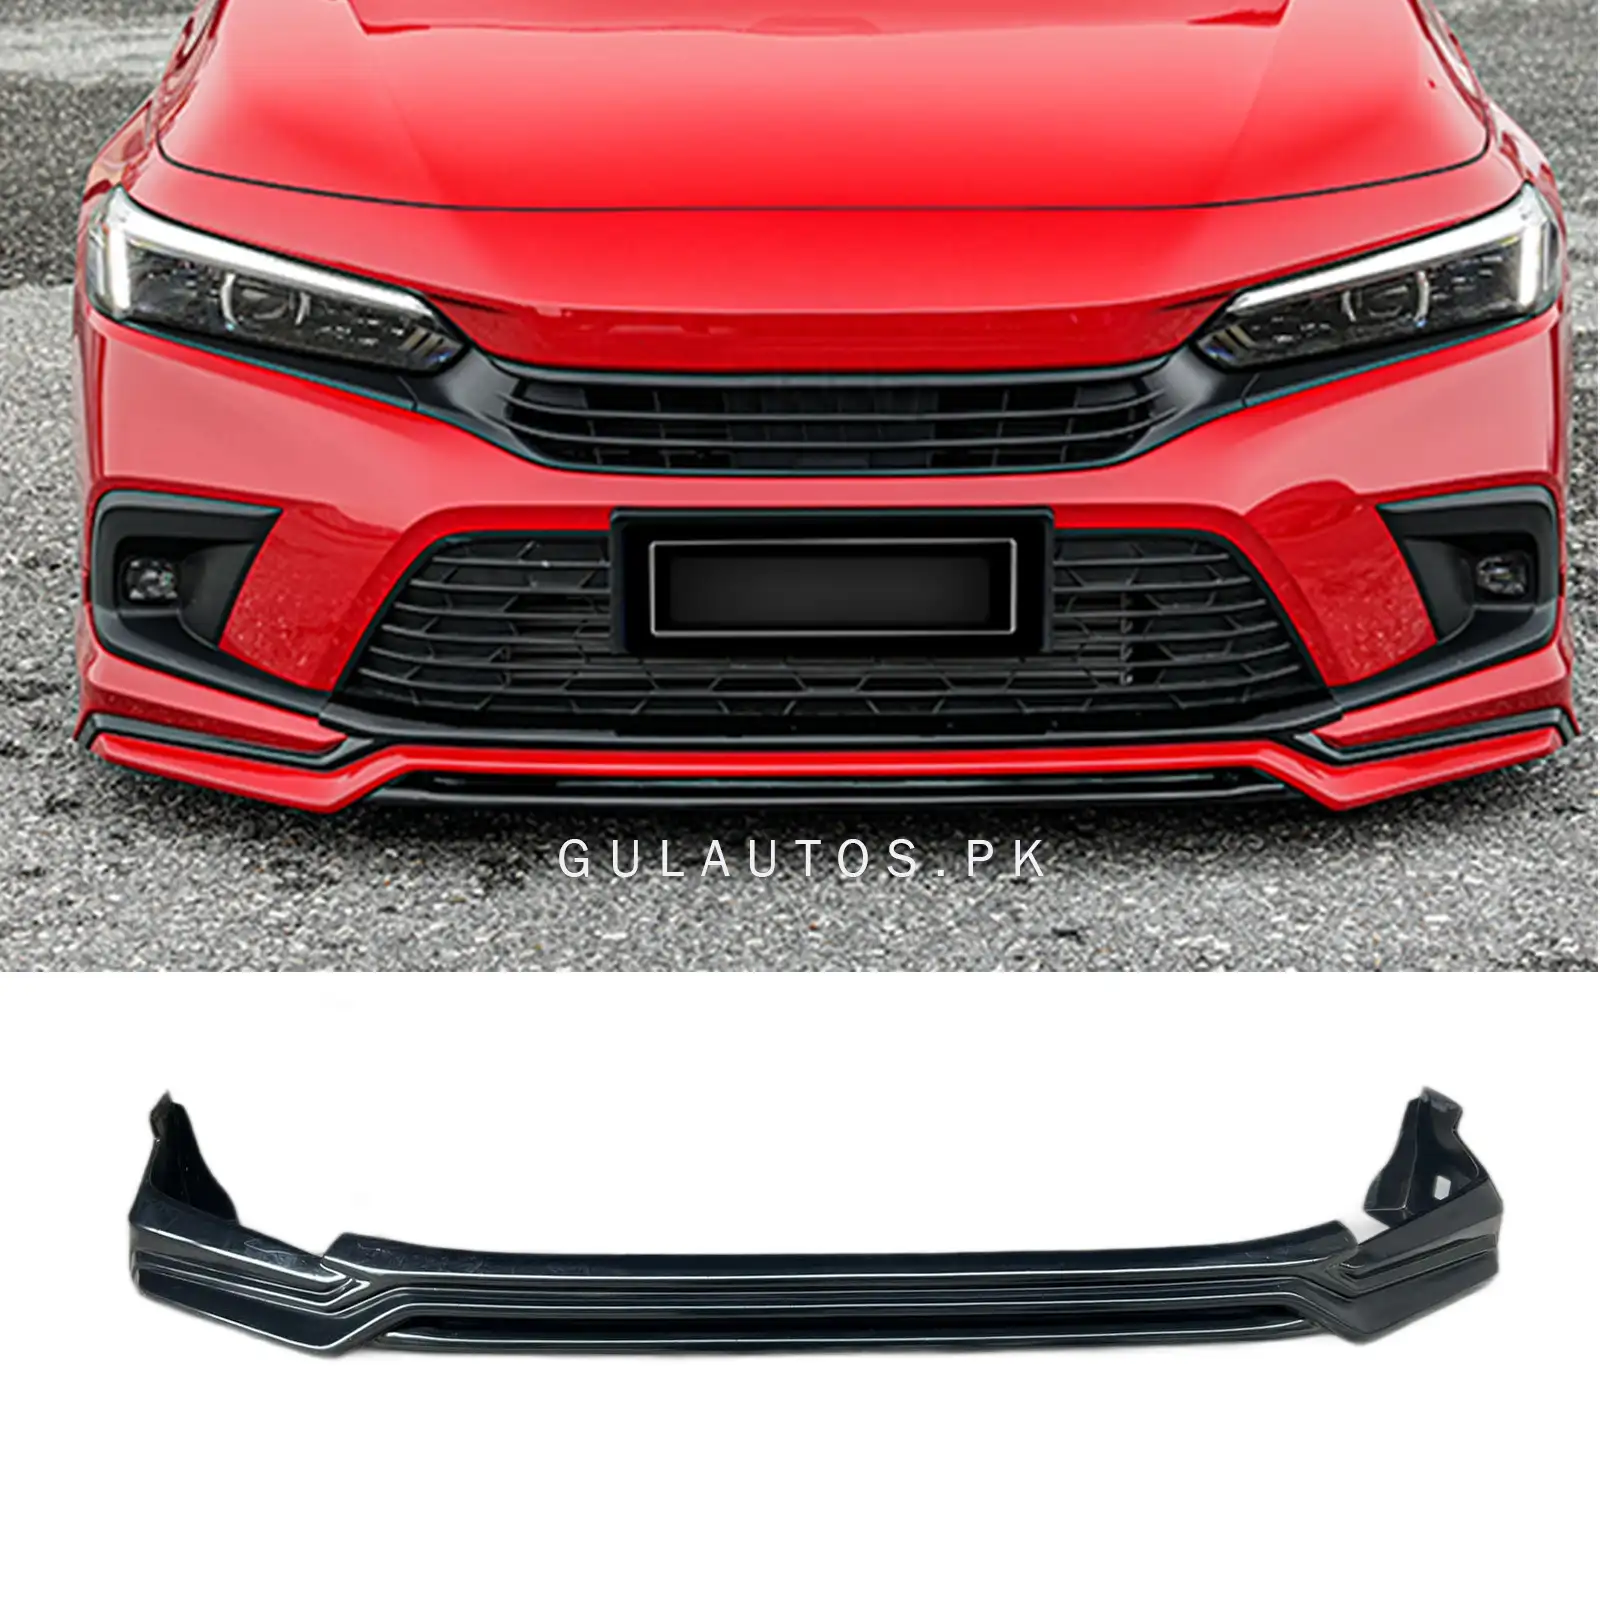 Honda Civic Yofer Style Body Kits in ABS Plastic Model - 2022-2024 | Car Sports Body Kit 4 Pcs,Honda Civic Body Kits,Honda Civic ABS Plastic Body Kits Honda Civic Yofer Style Body Kits in ABS Plastic Model - 2022-2024 | Car Sports Body Kit 4 Pcs